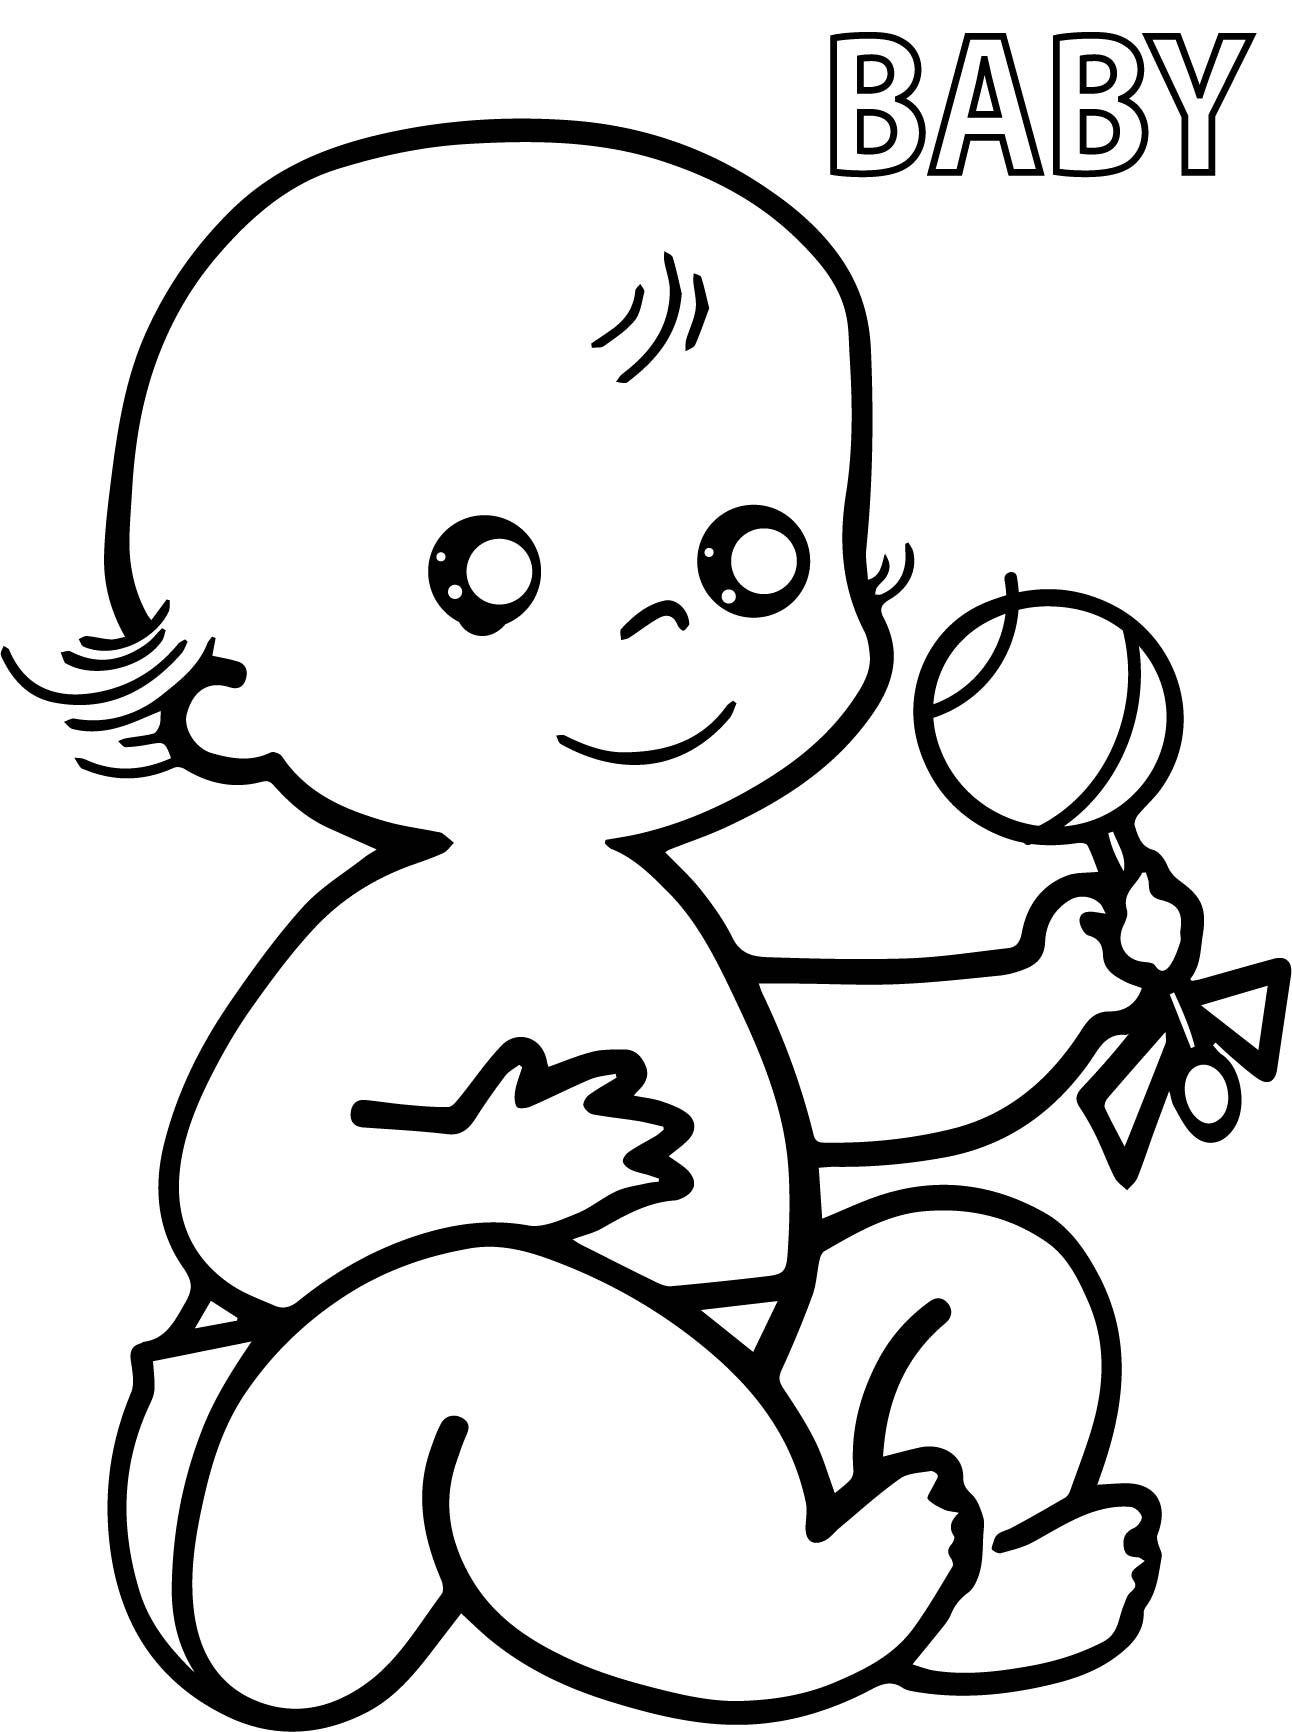 Baby Girls Coloring Pages
 Precious Moments Baby Girl Coloring Pages at GetDrawings